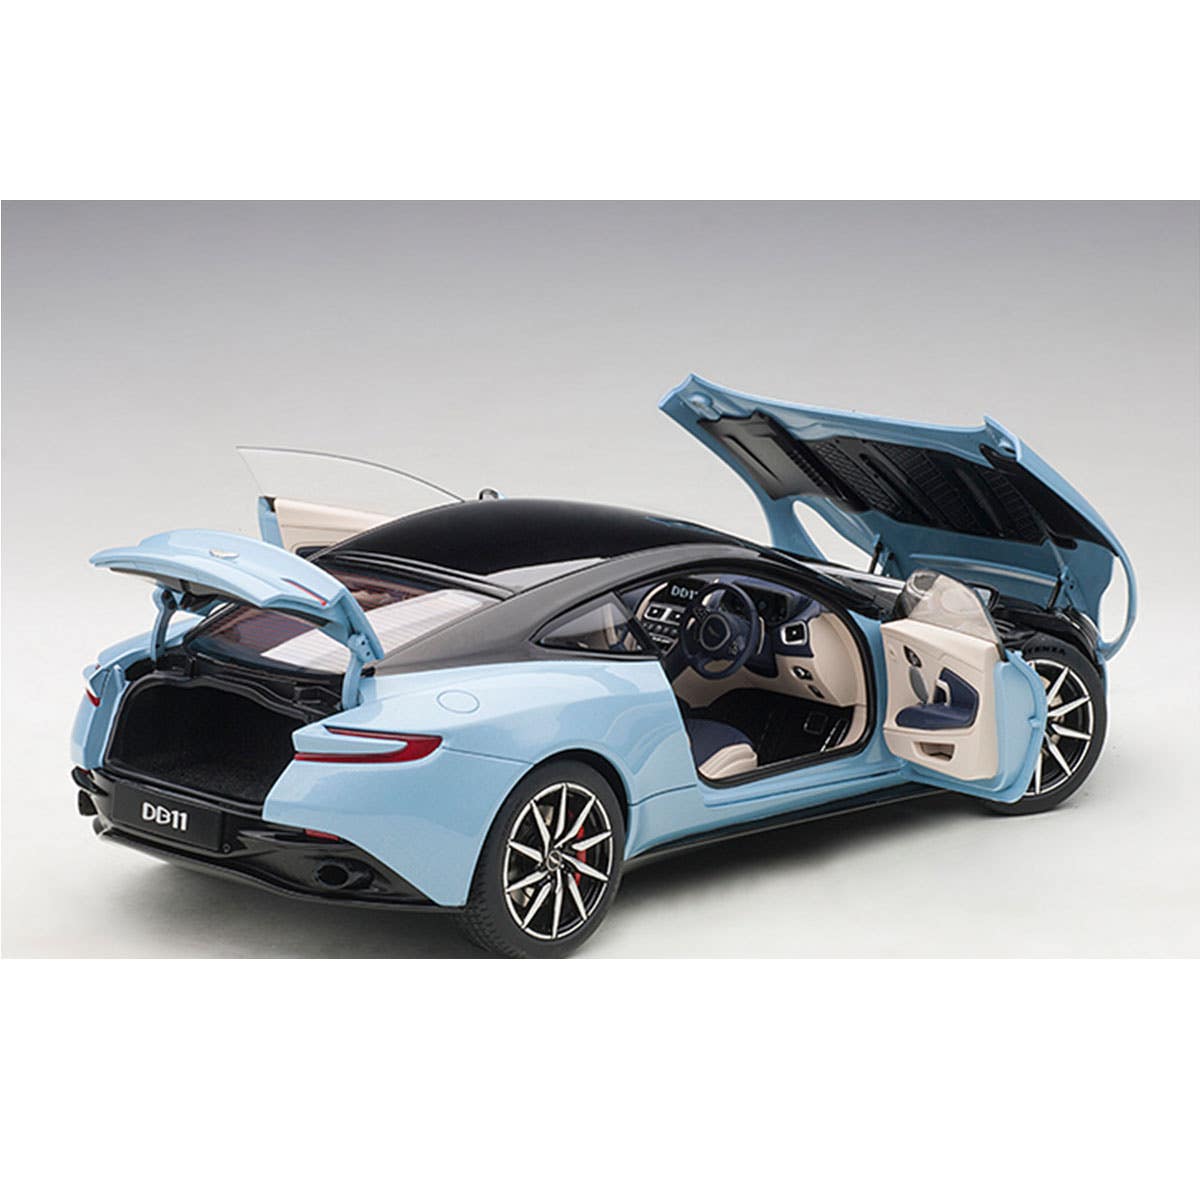 ASTON MARTIN DB11 (FROSTED GLASS BLUE ) - 1:18 Scale Composite Model Car